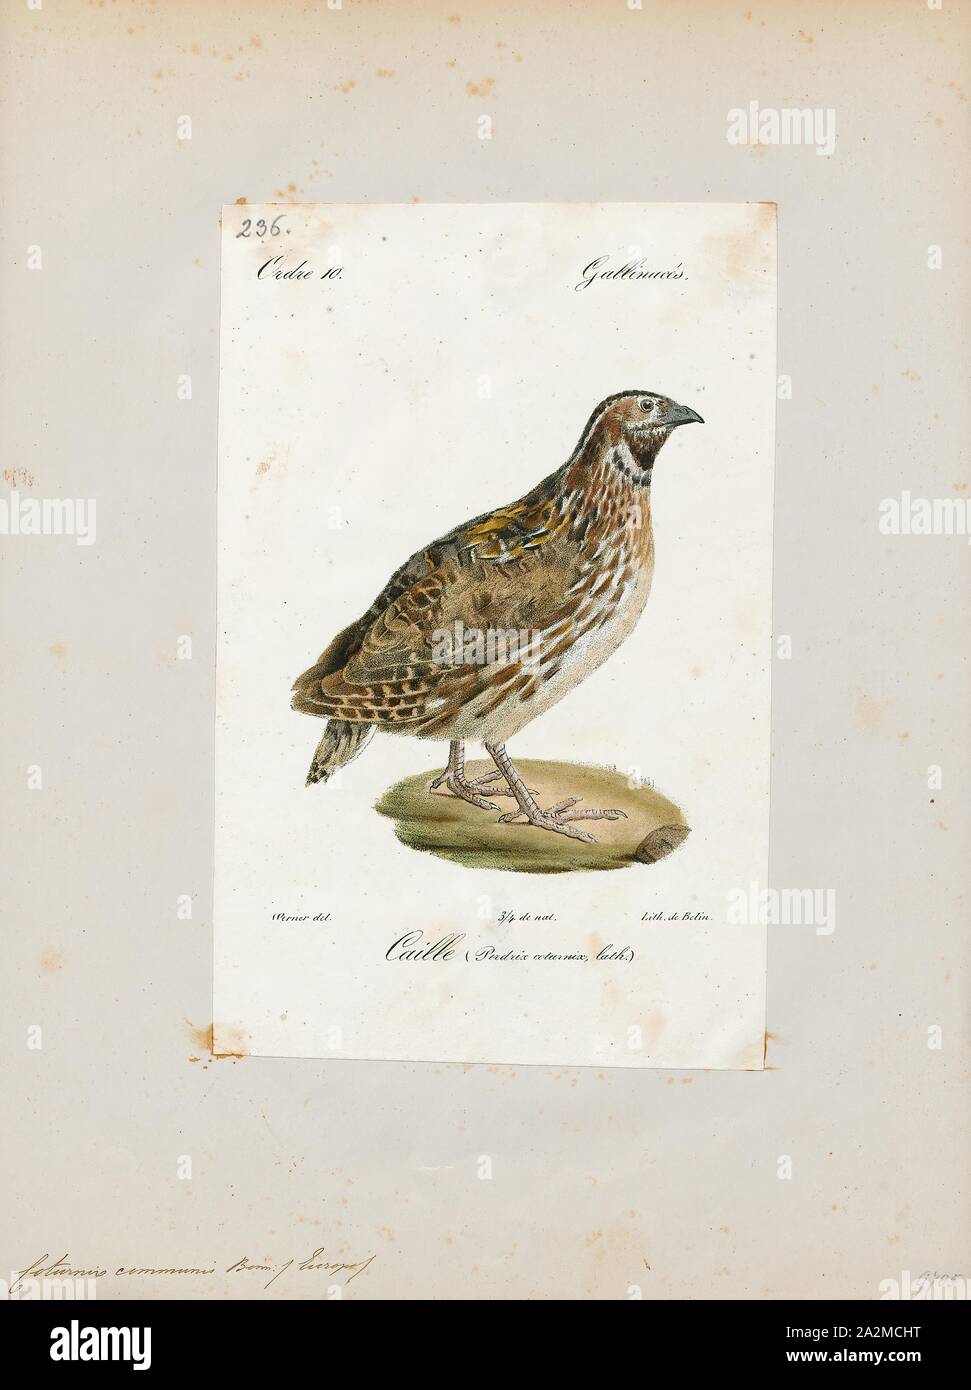 Coturnix communis, Print, Coturnix is a genus of six extant species and two known extinct species of Old World quail. The genus name is the Latin for the common quail., 1842-1848 Stock Photo